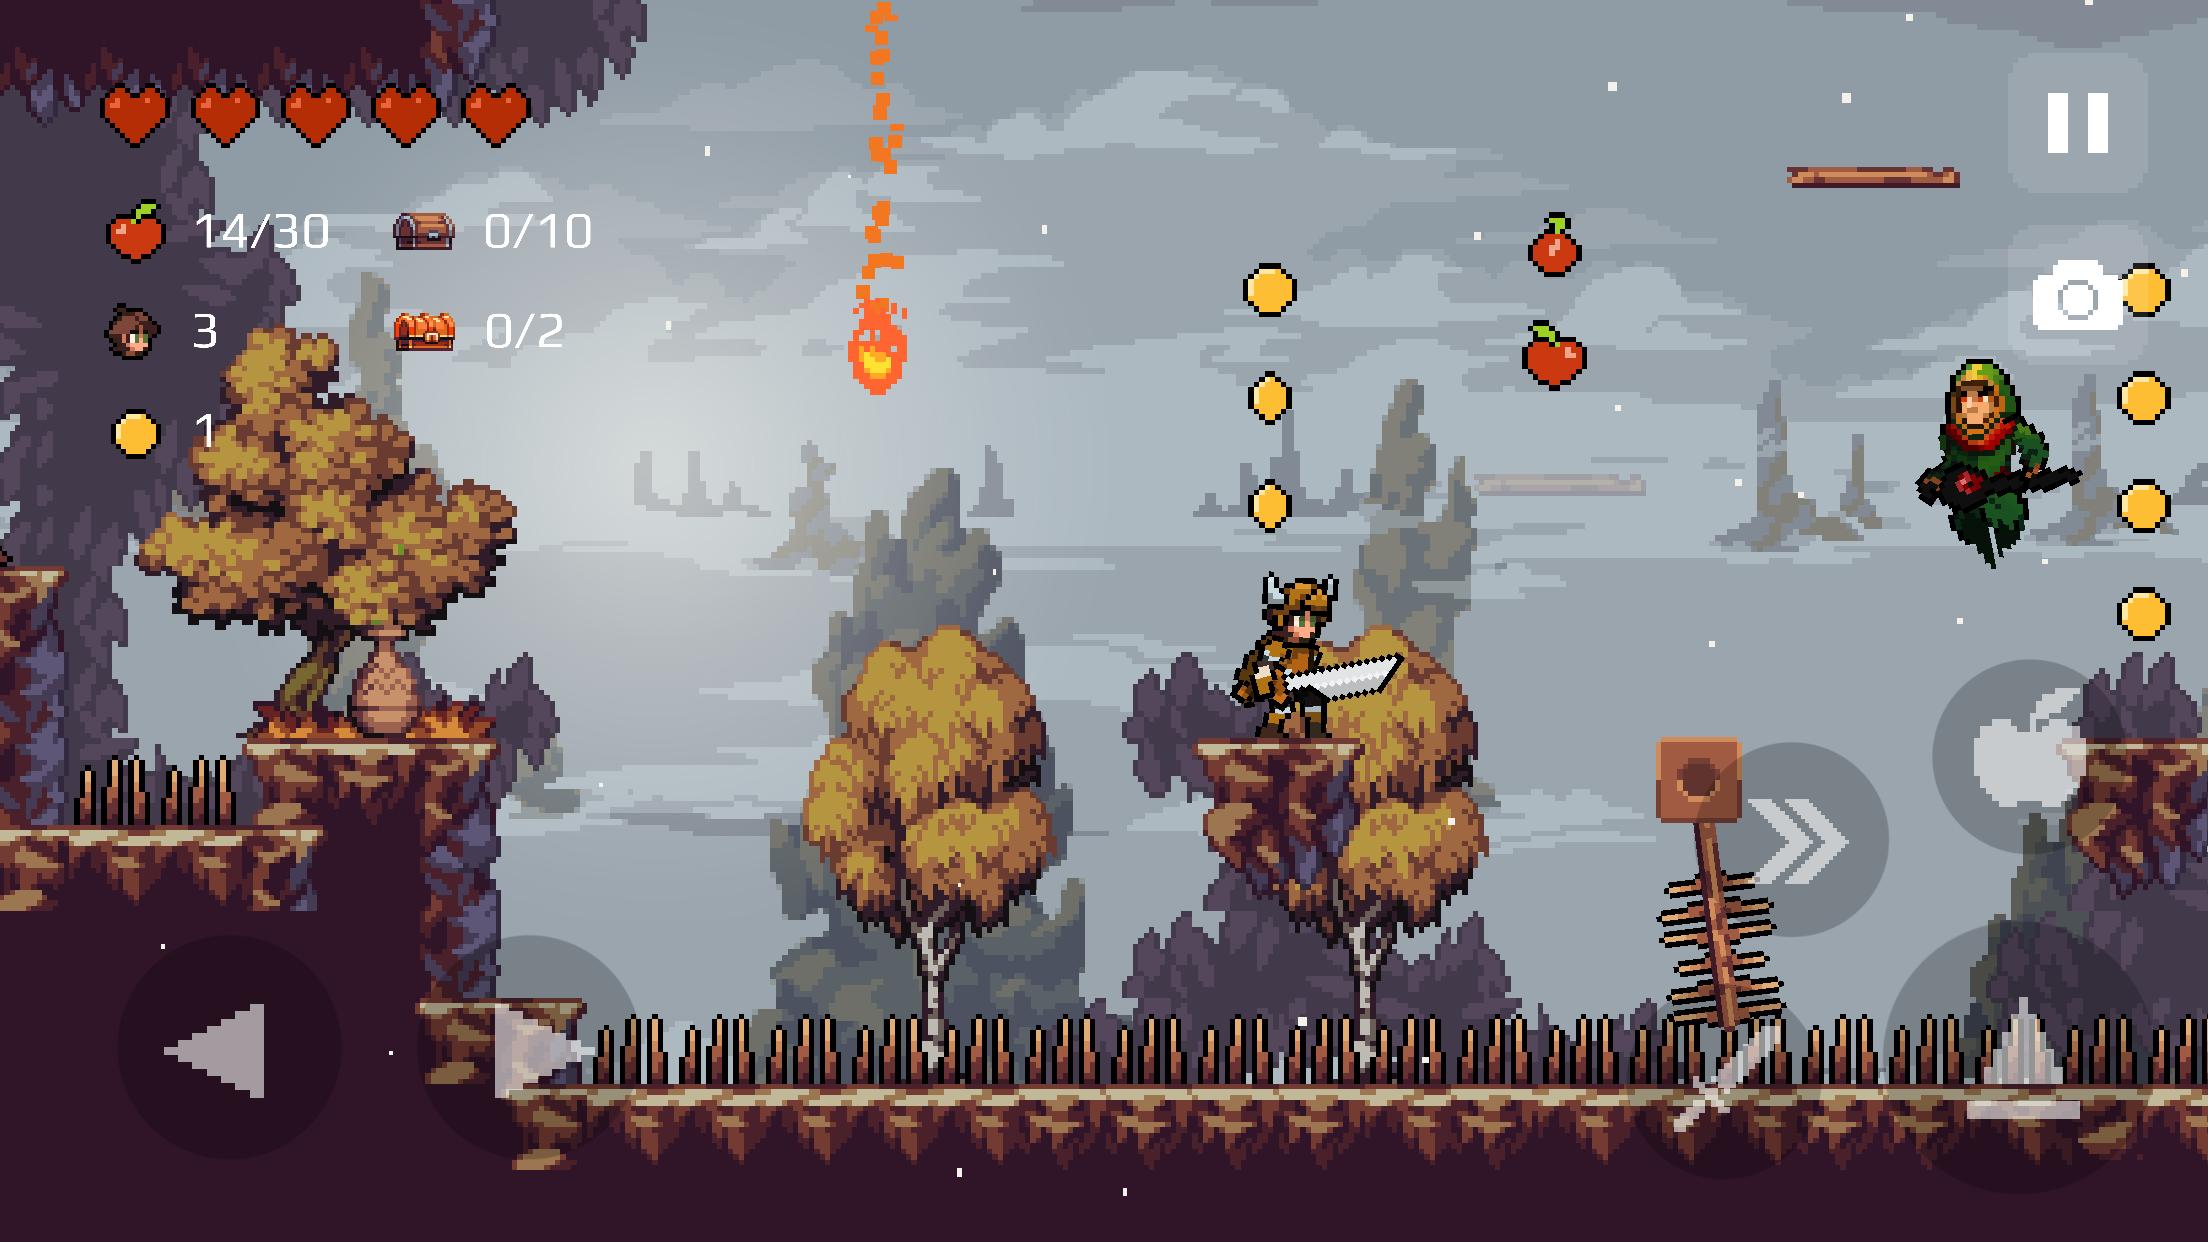 Download Apple Knight: Action Platformer Pro 2.1.2 APK For Android